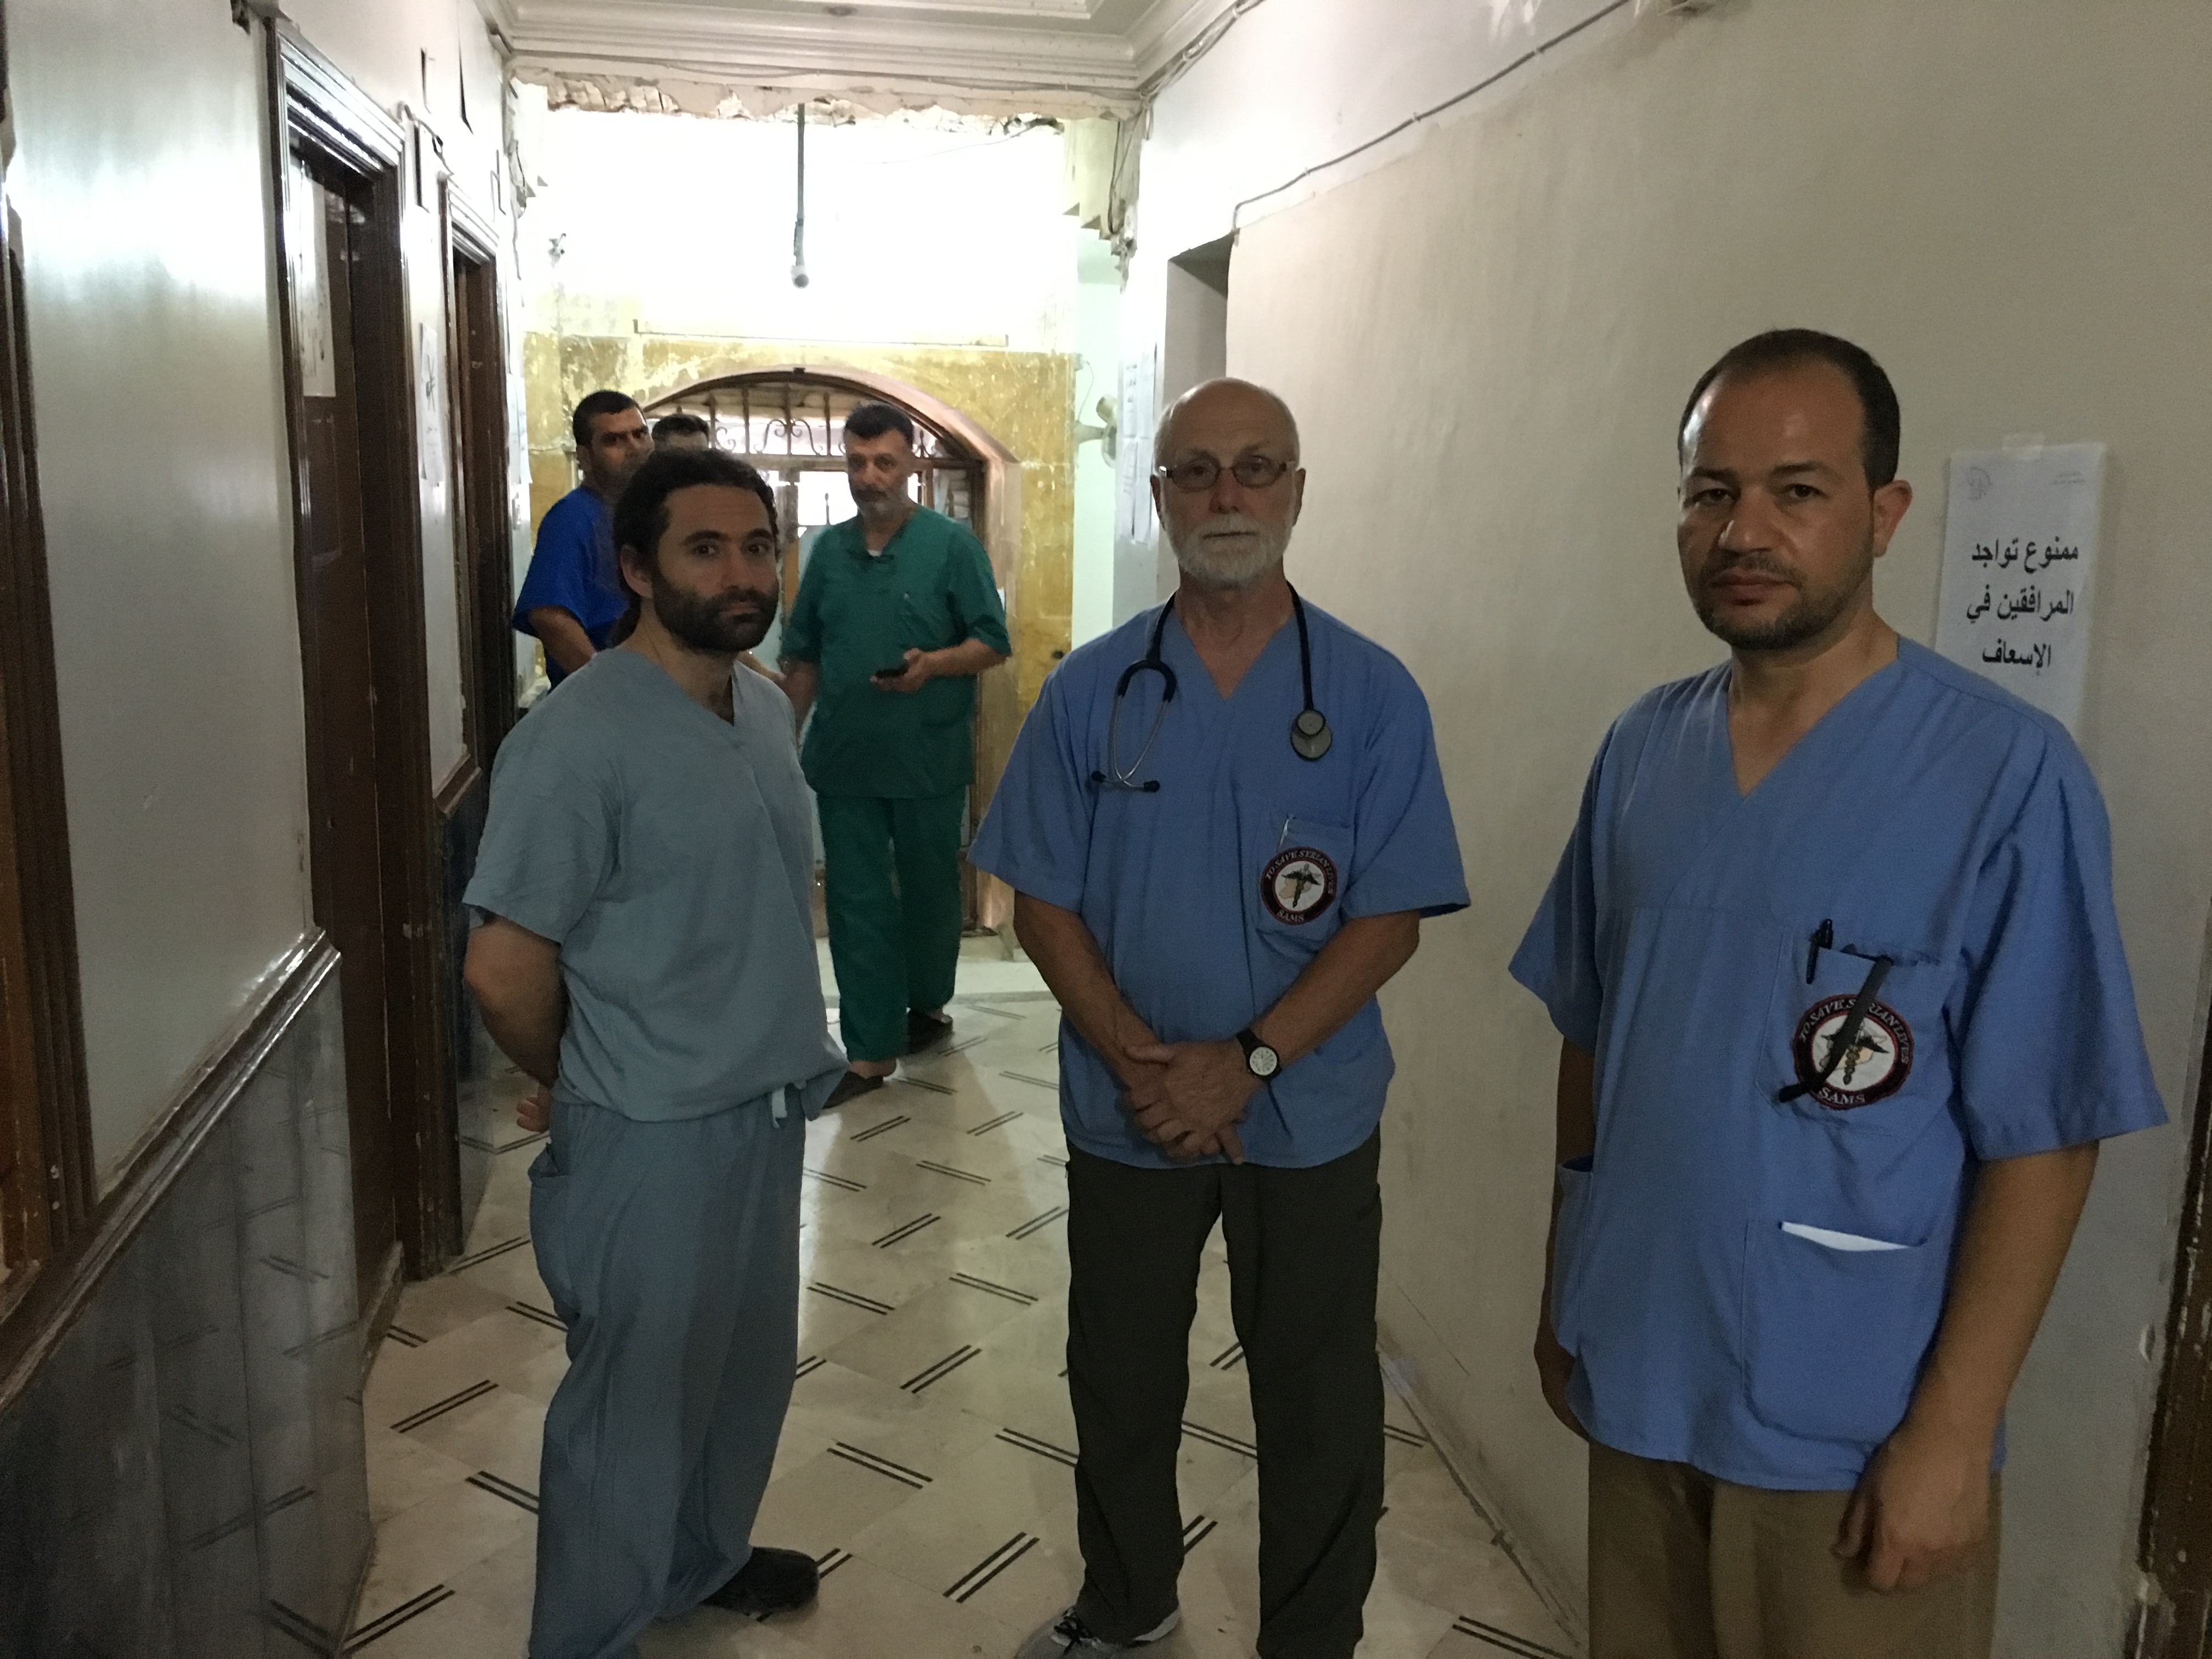 Dr Zaher Sahloul (Right) with two fellow colleagues from Chicago in Aleppo, end of June 2016. Photo used with permission.